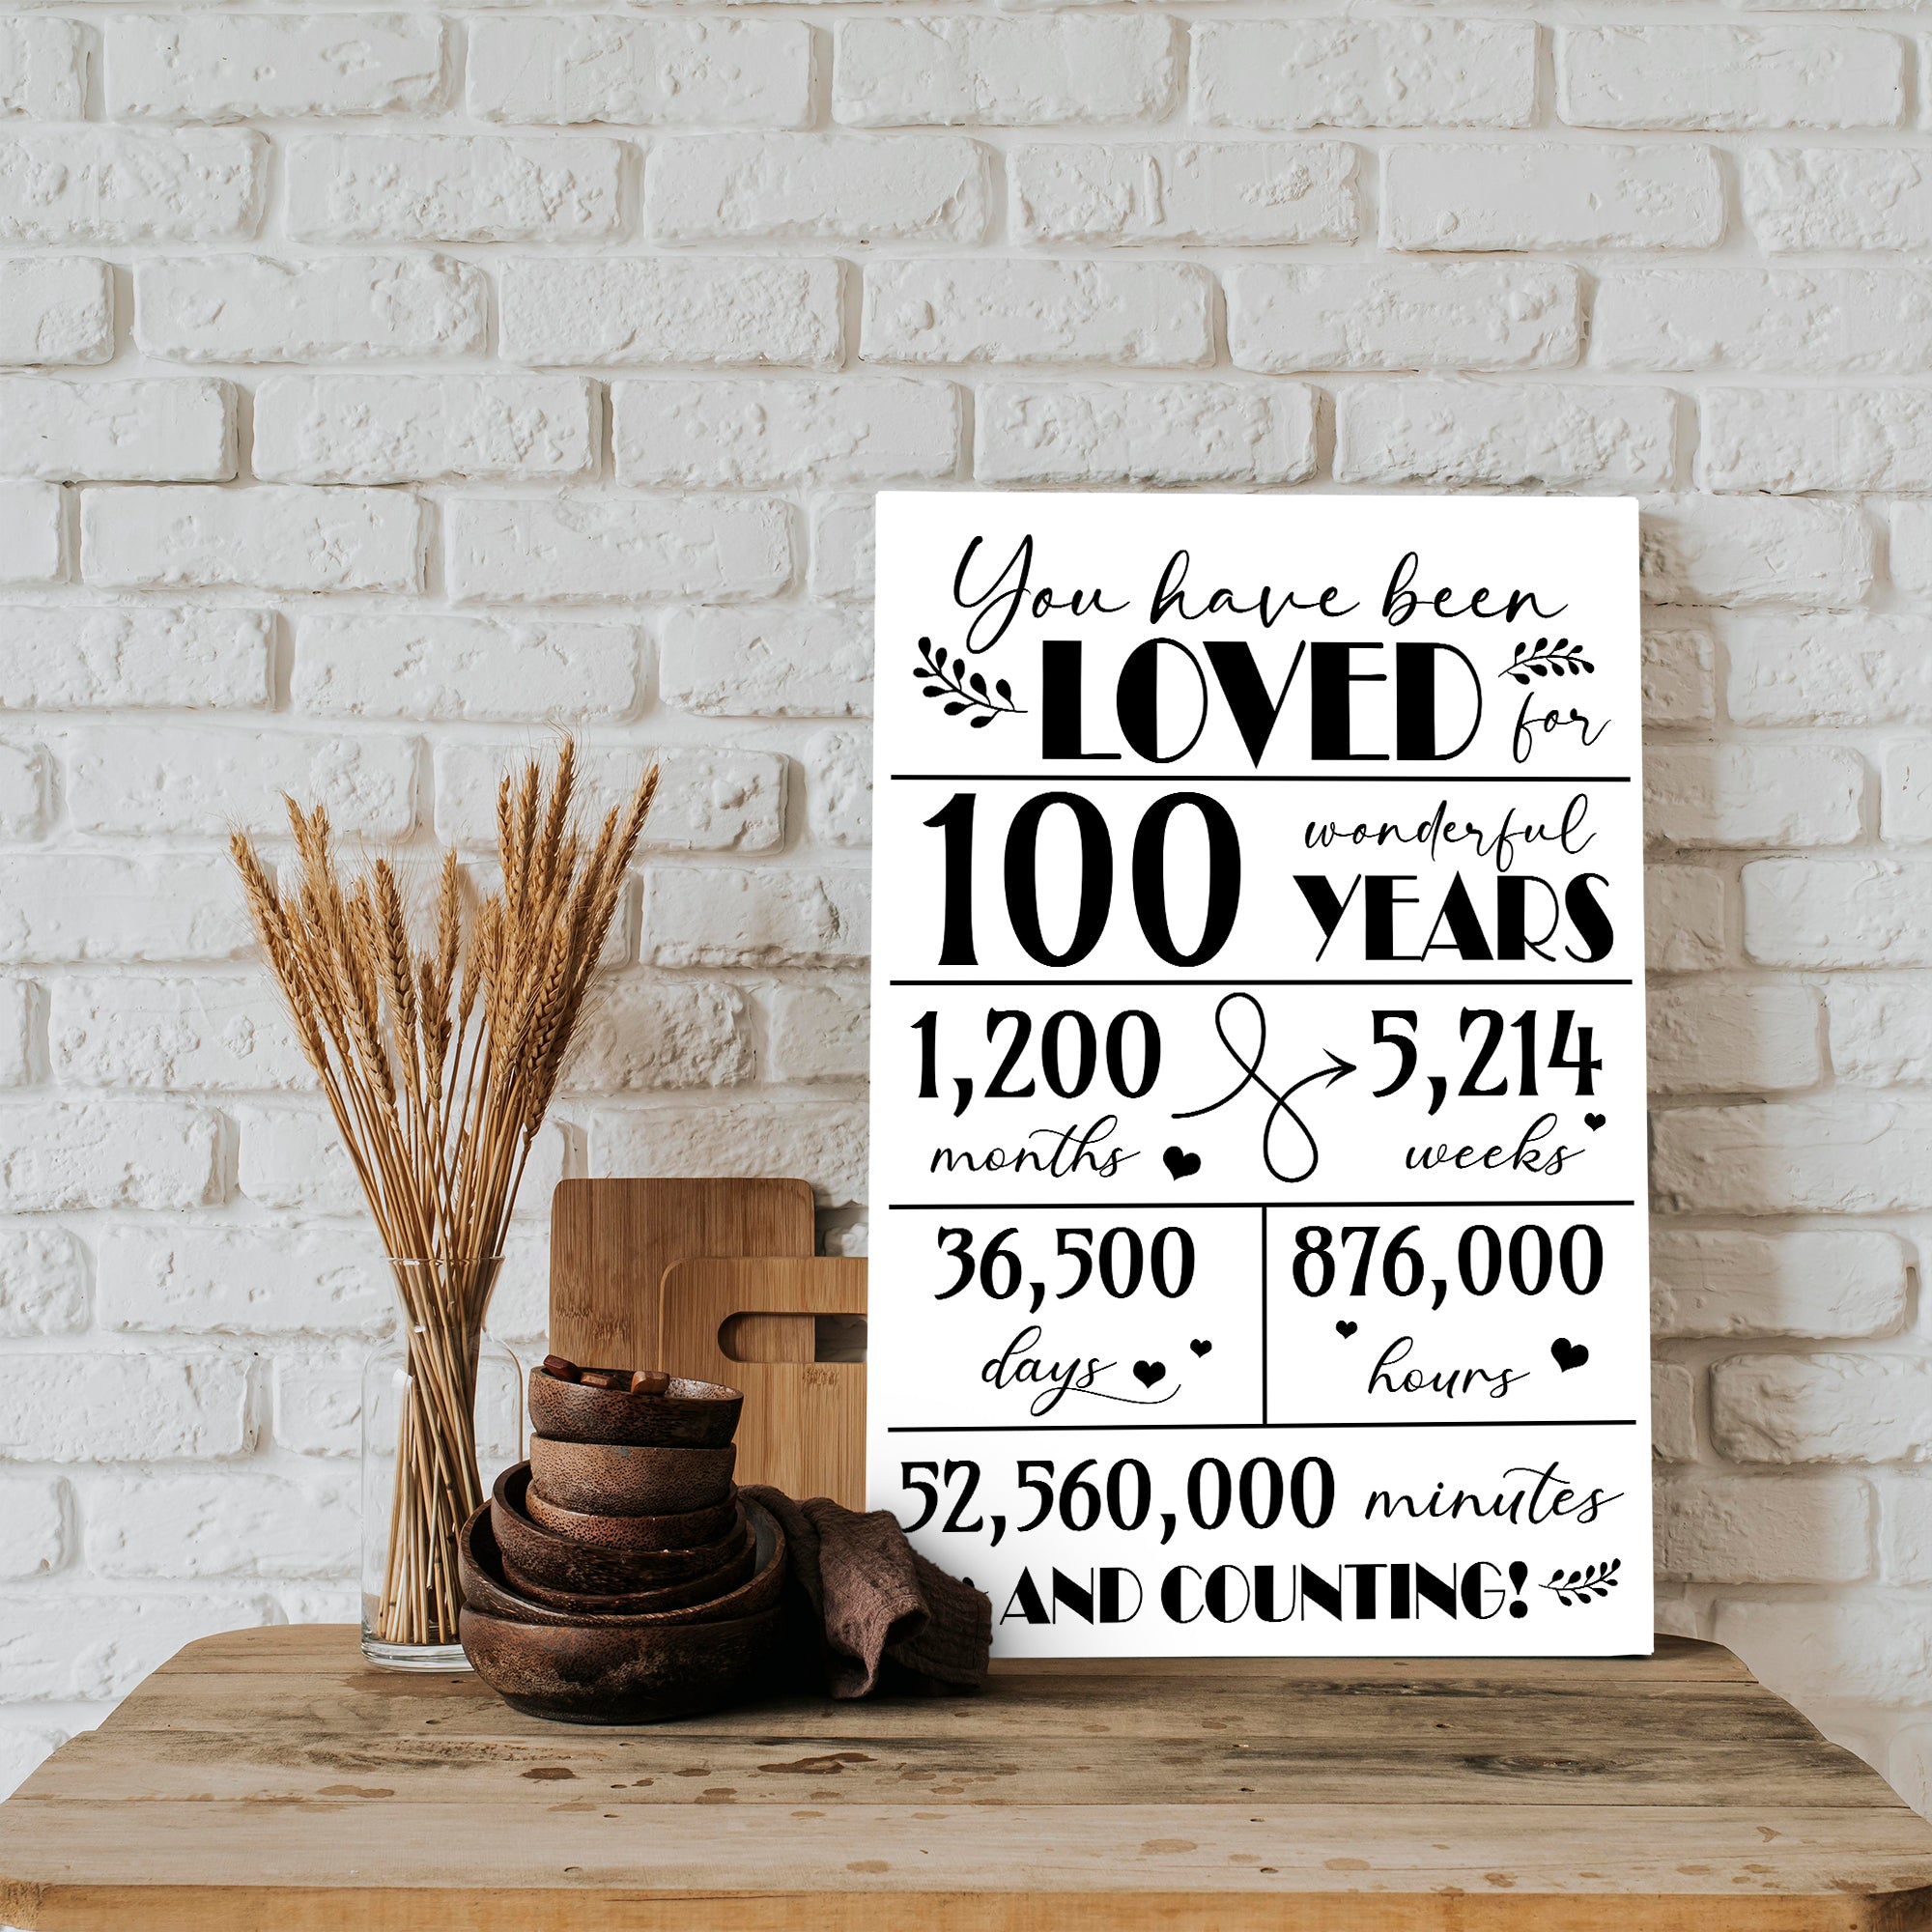 You Have Been Loved For 100 Wonderful Years 100th Birthday Anniversary Gift - 207HNTTCA385